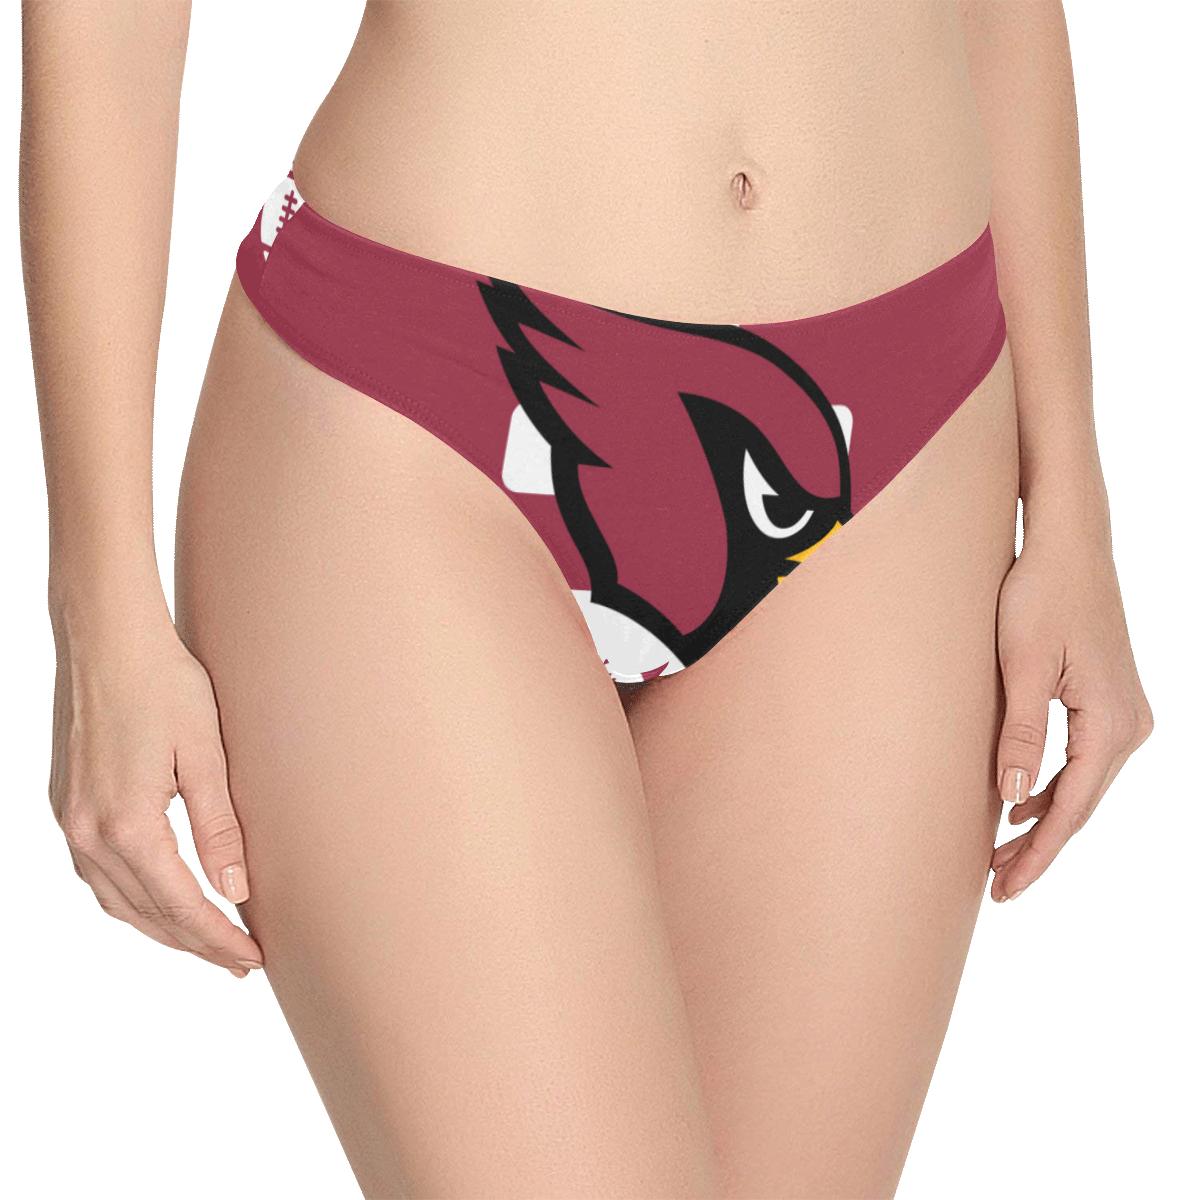 West Virginia Mountaineers Women’s Classic Thong (Model L5)